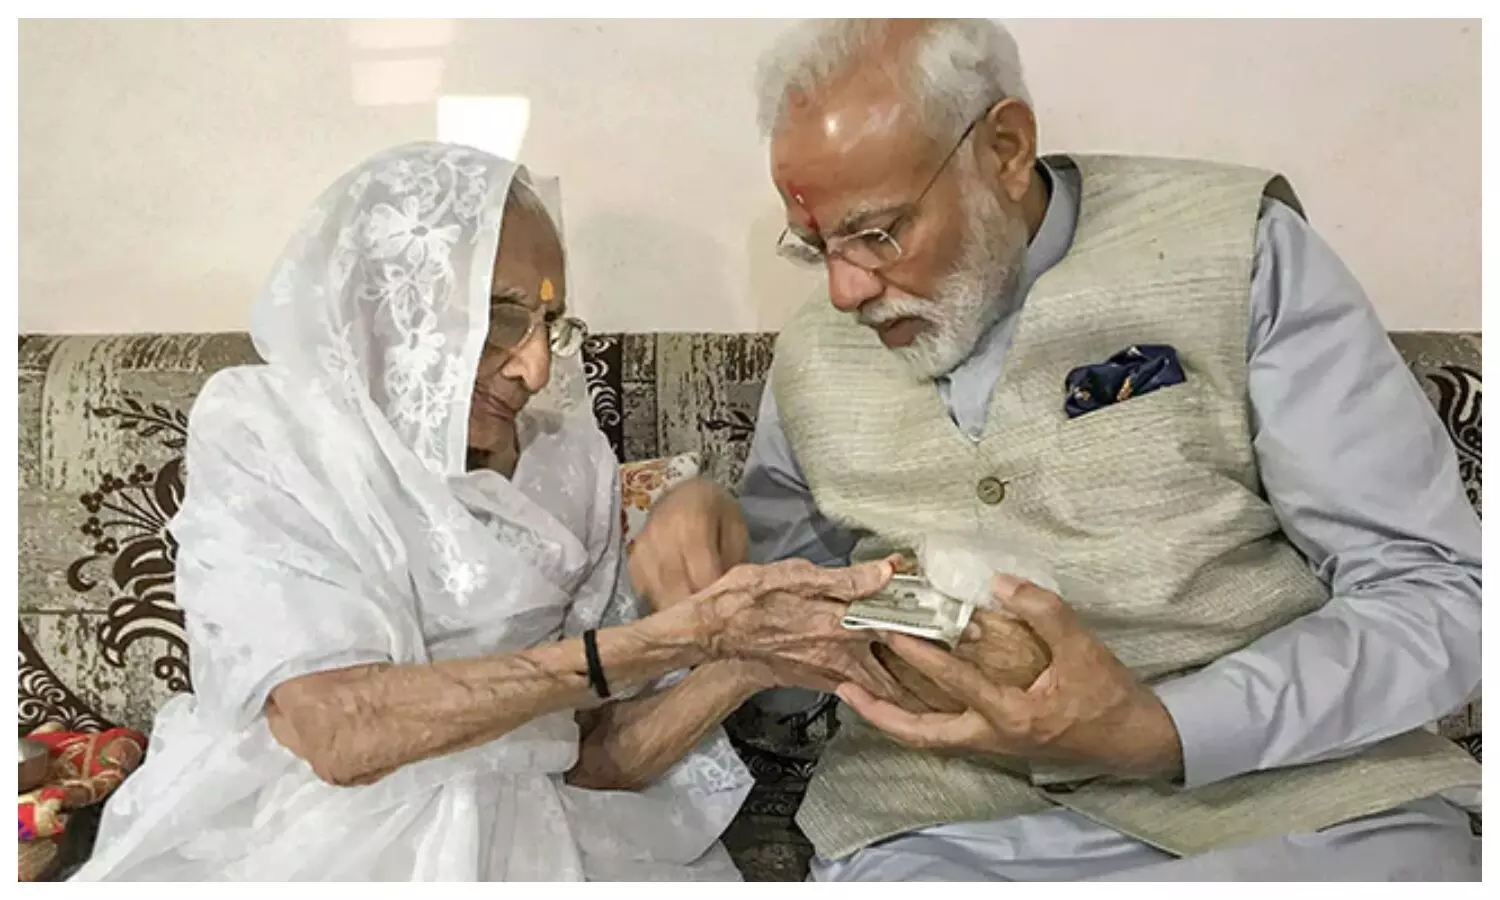 PM Modi with his mother